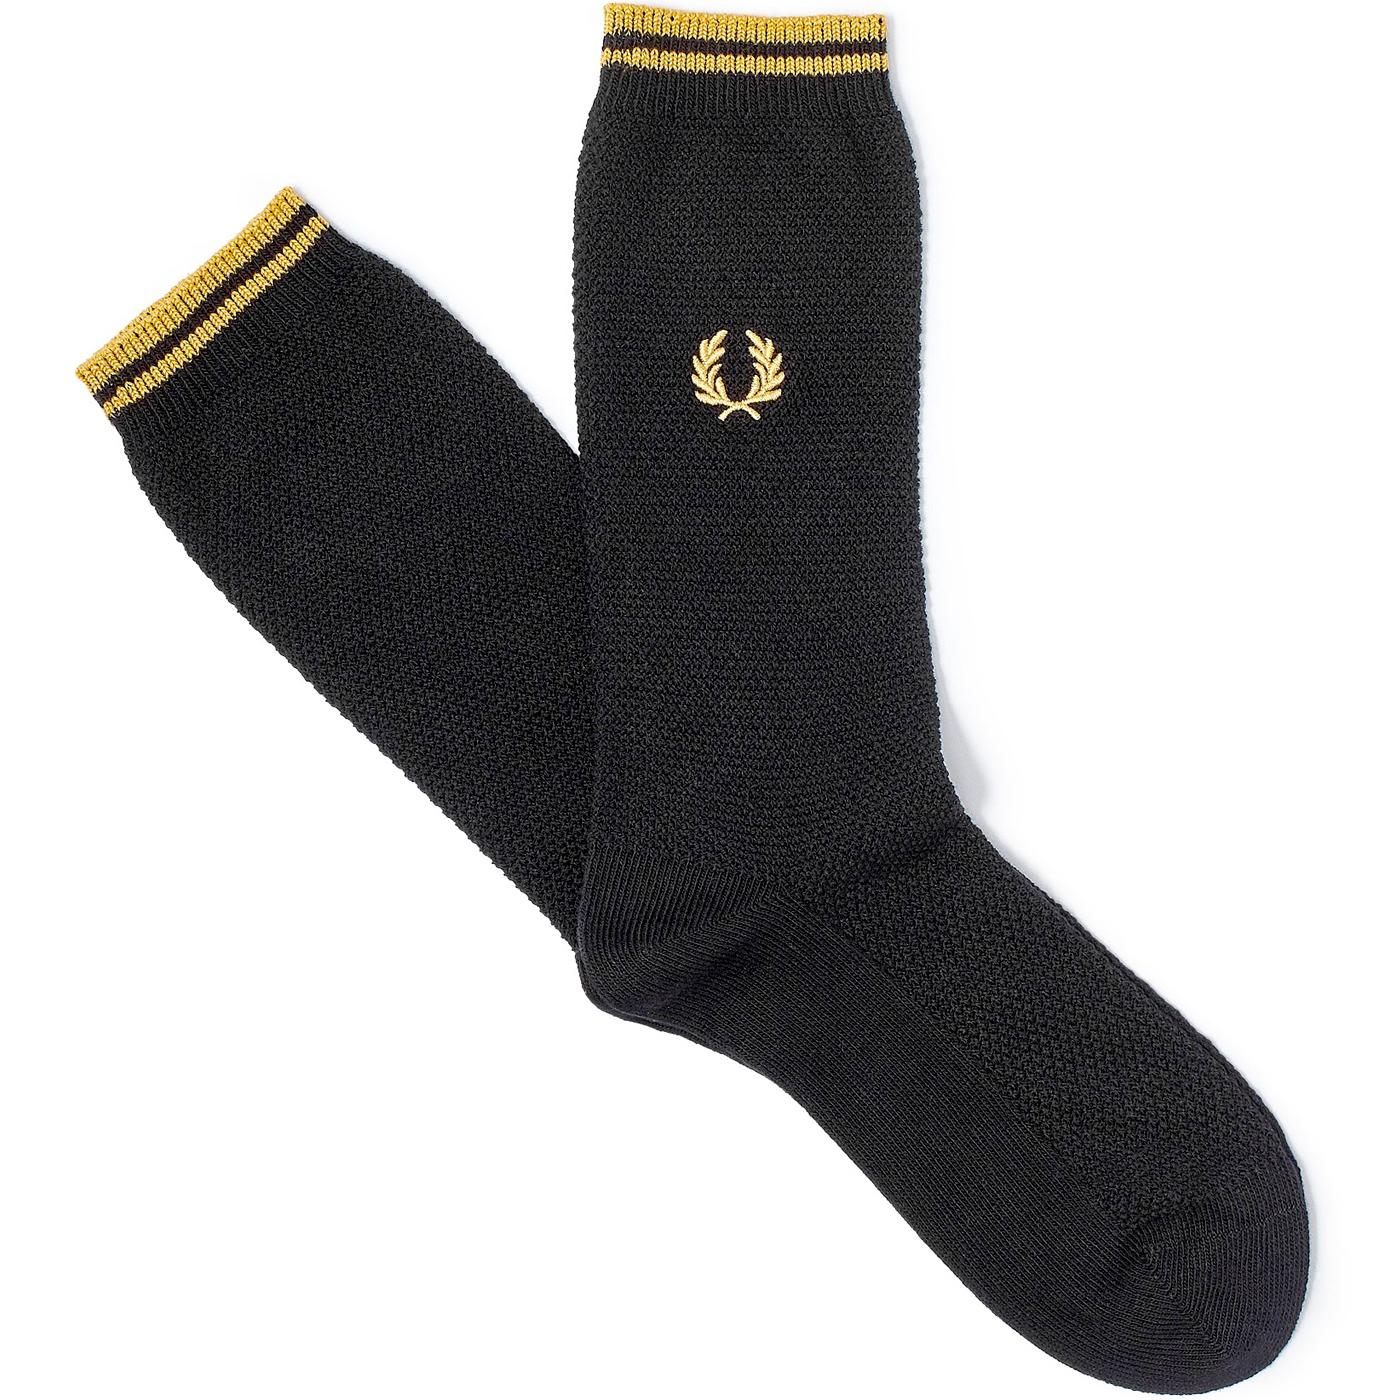 + FRED PERRY Retro Tipped Socks (Black/Champagne)